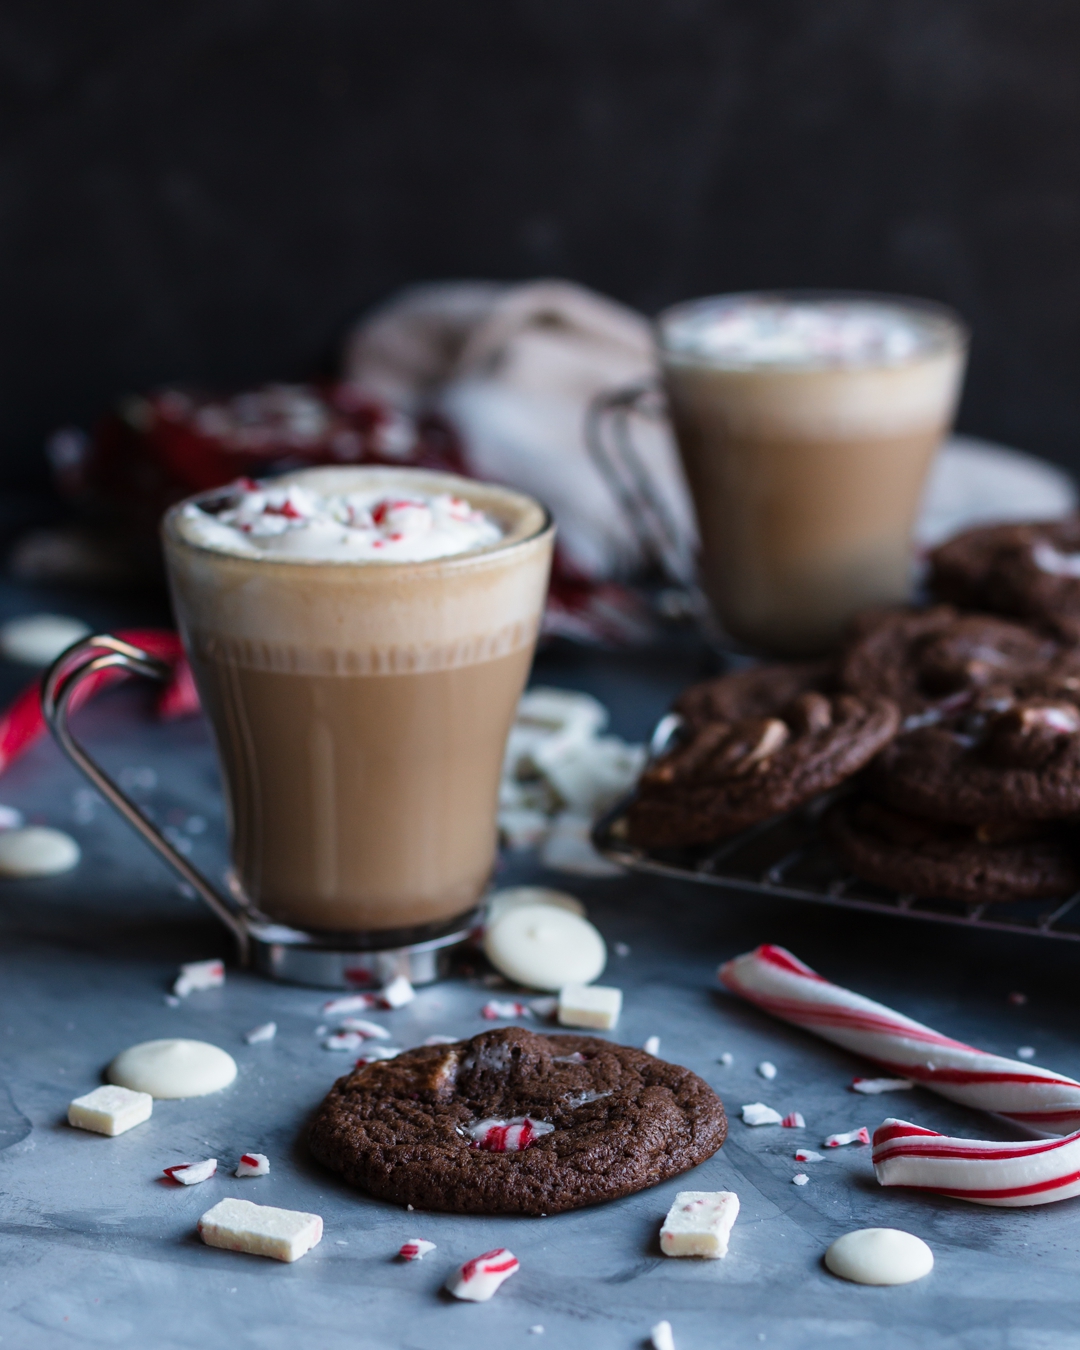 45 degrees shot of cookie surrounded by candy canes, white chocolate and peppermint chips, cookies, and two glasses with lattes in them.